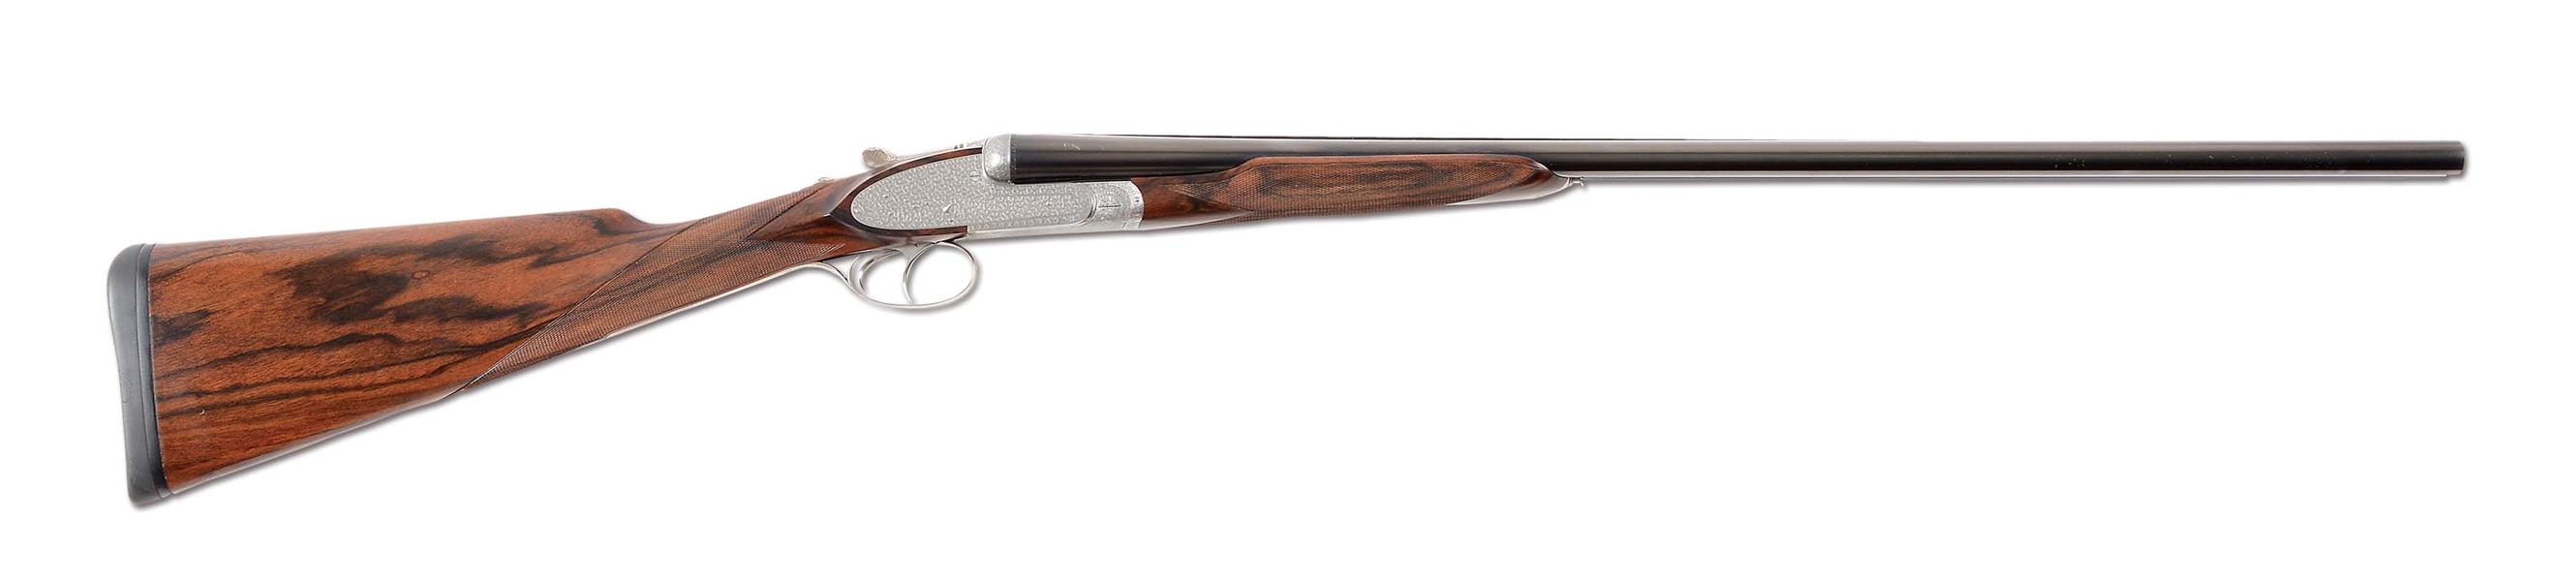 (M) THIRD IN THE SERIES "SET FOR LIFE" PIOTTI KING 1 20 BORE SIDELOCK EJECTOR SHOTGUN.